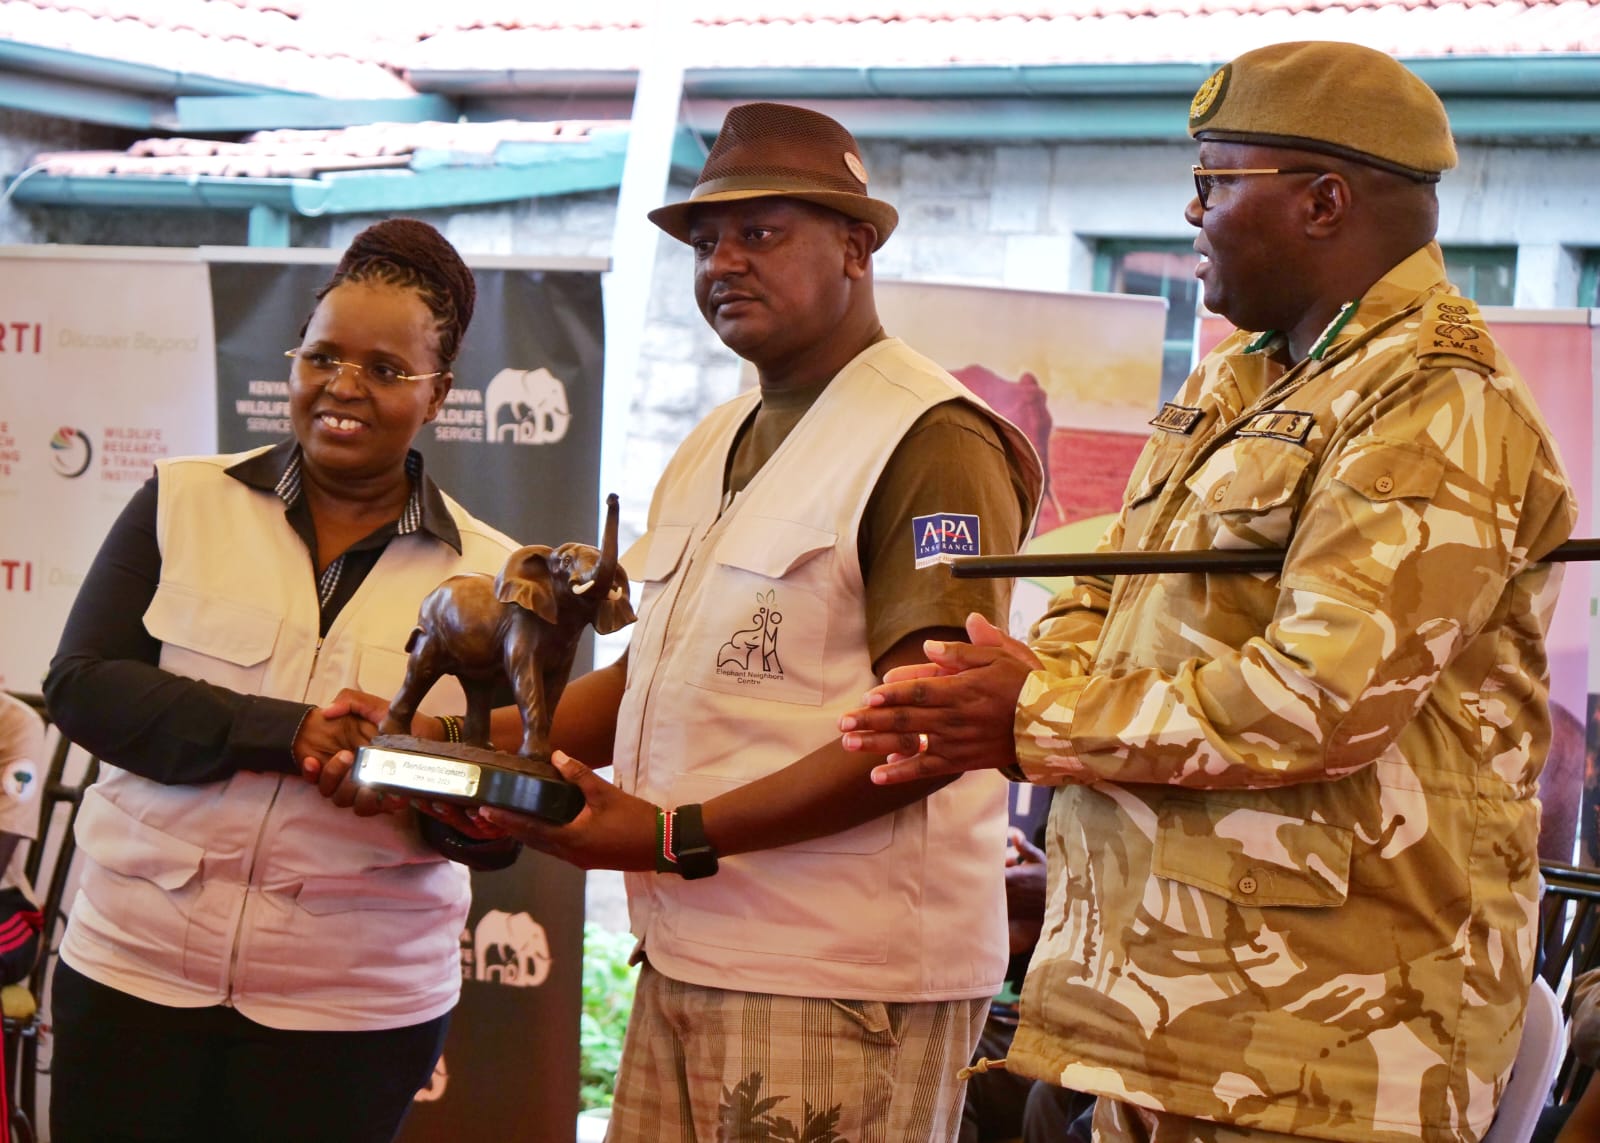 Left to right: The Cabinet Secretary, Hon. Peninah Malonza, with the Executive Director of Elephants Neighbors Center, Jim Nyamu, and Kenya Wildlife Service Ag. Director General, Dr. Erastus Kanga, at the flagging off of the East and Central Africa Campaign Walk, at the National Museums of Kenya, Nairobi.